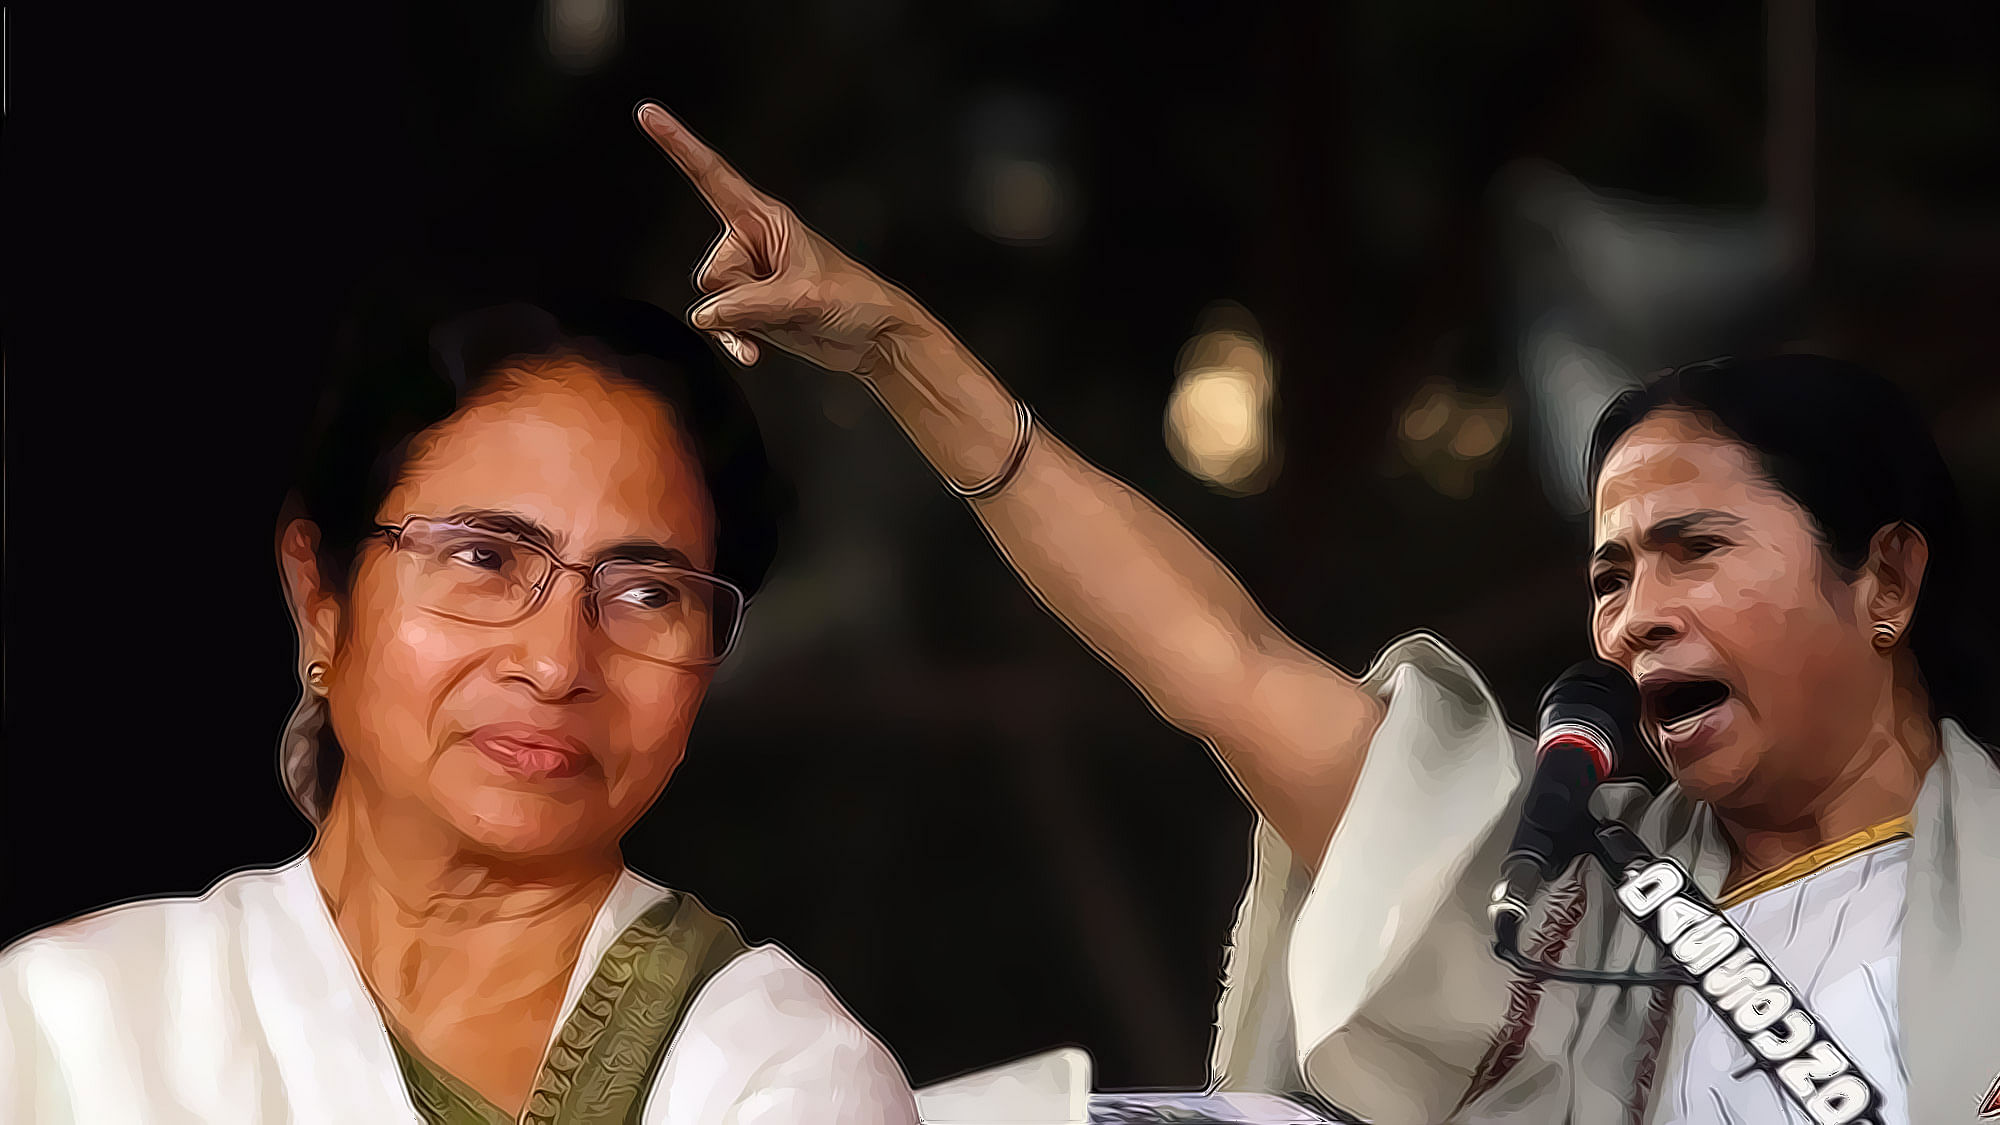 West Bengal Chief Minister Mamata Banerjee. (Photo: <b>The Quint</b>)